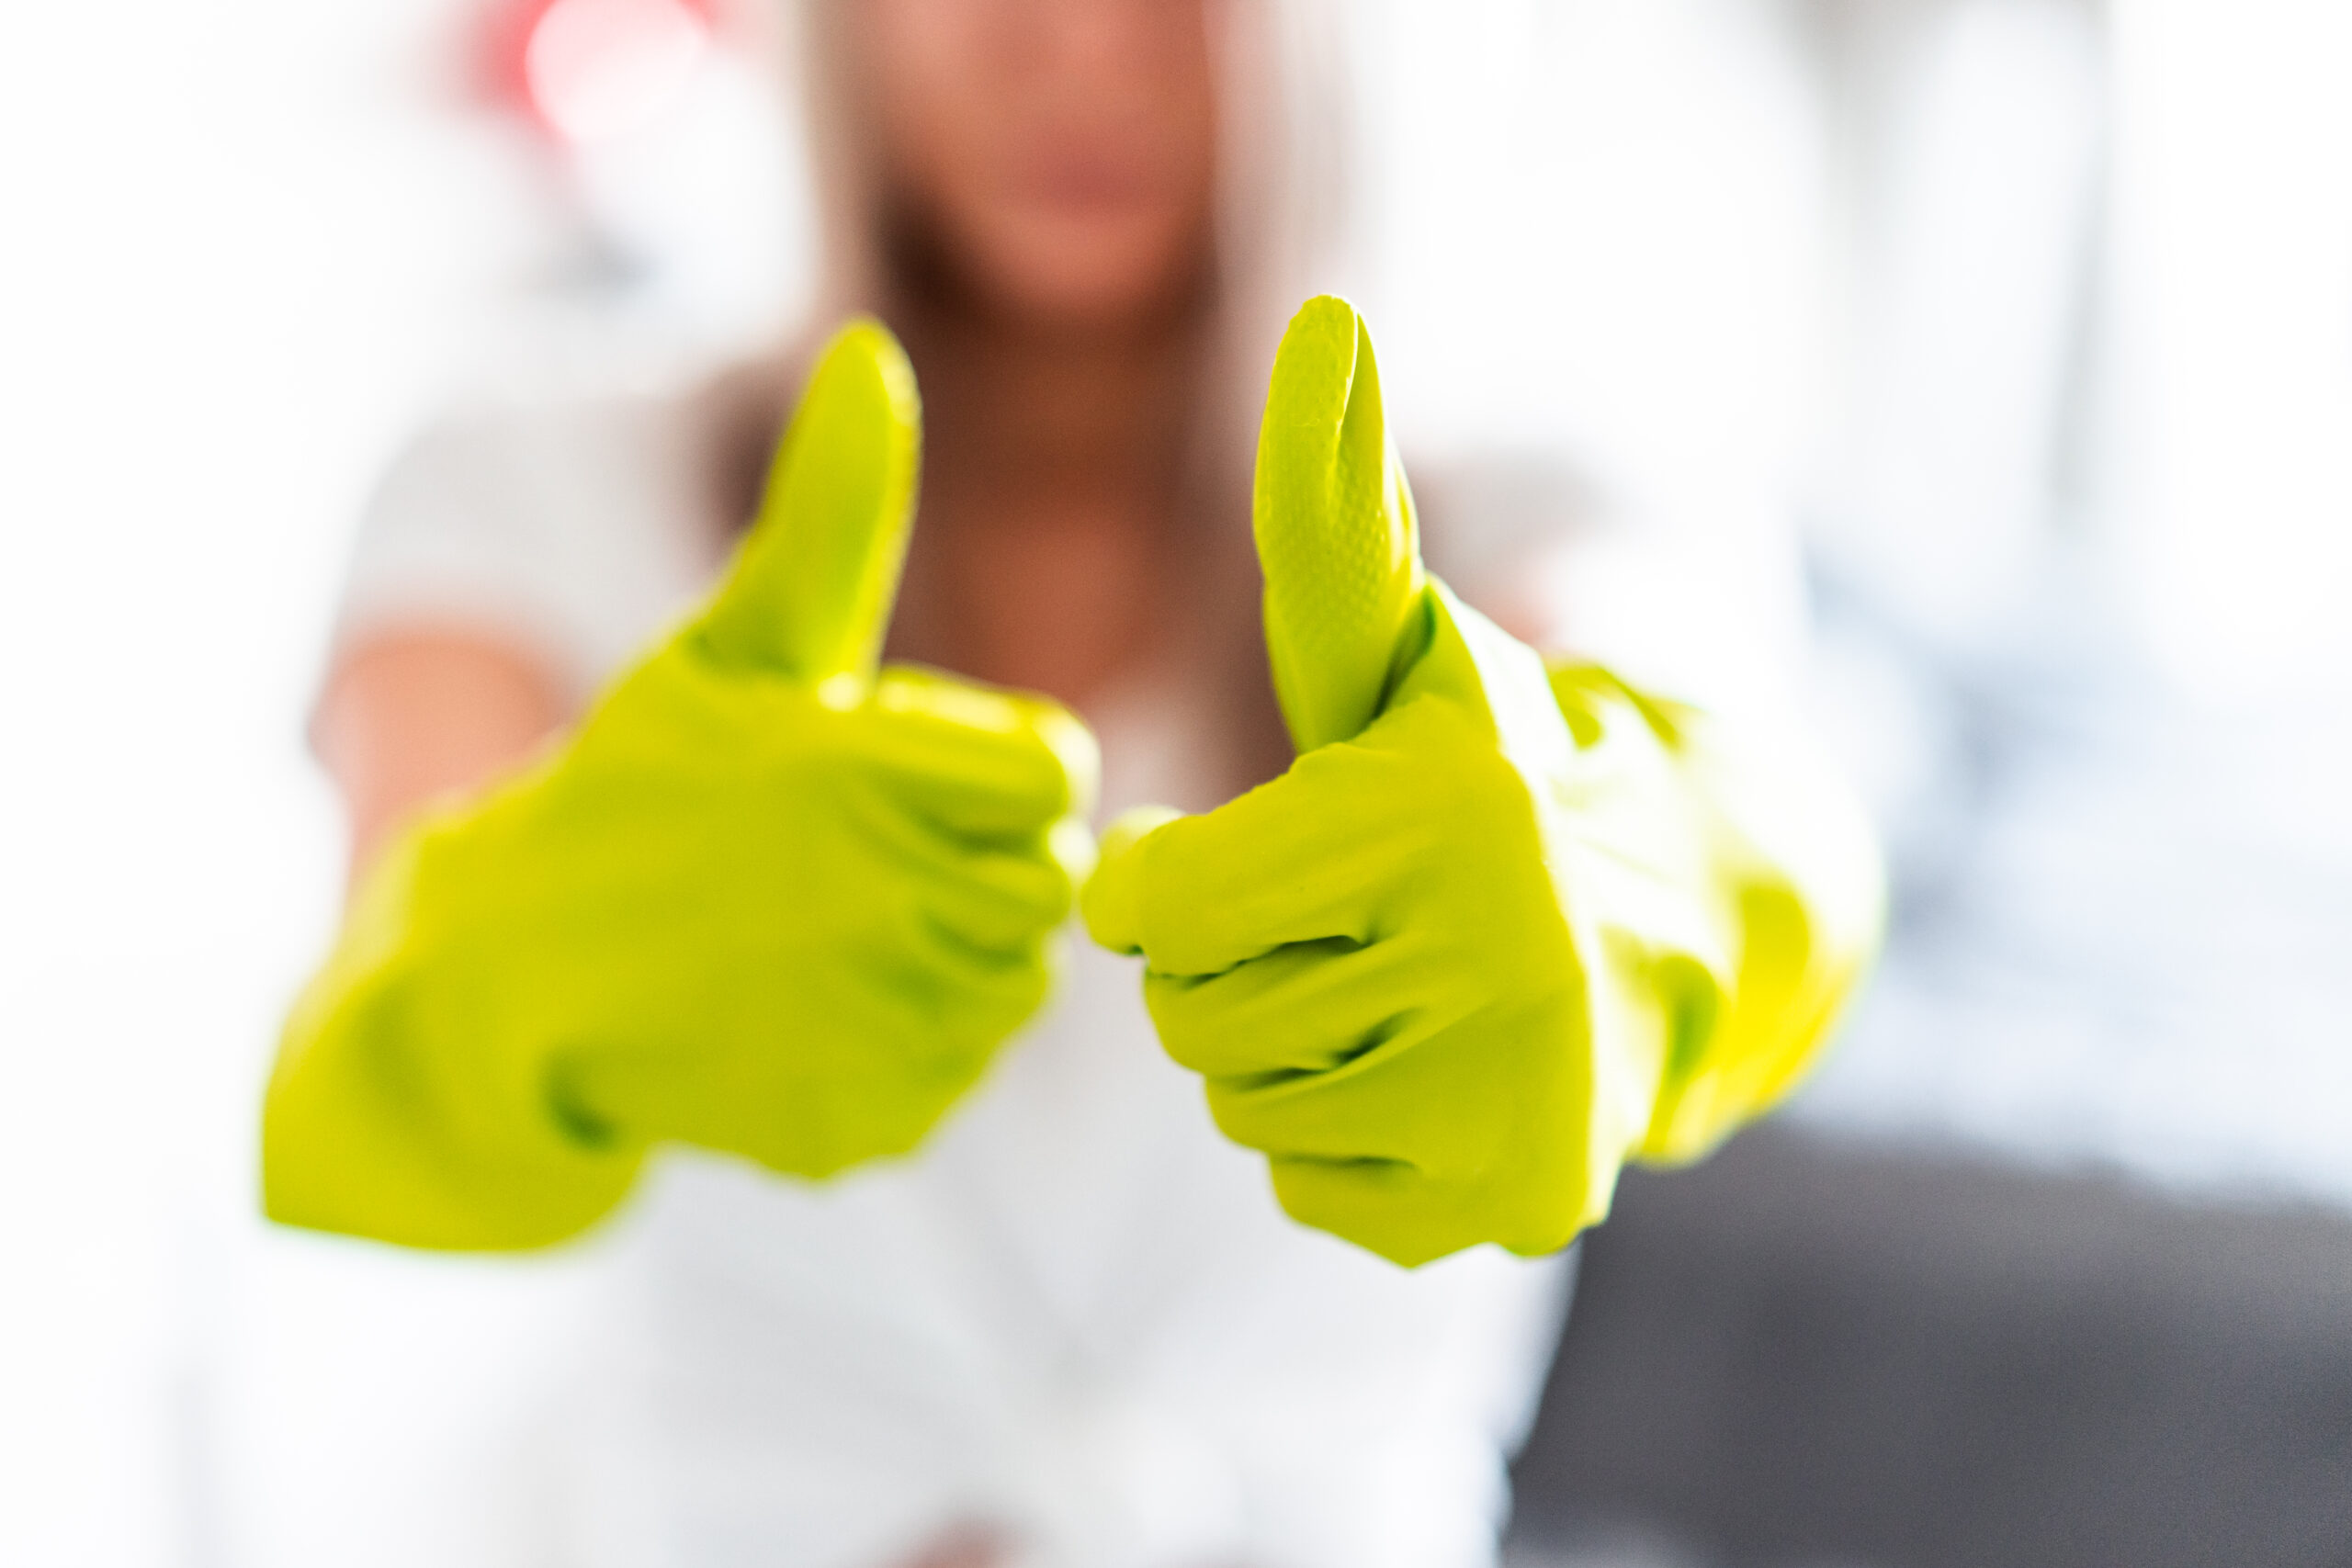 10 Efficient House Cleaning Tips From the Be Clean Team